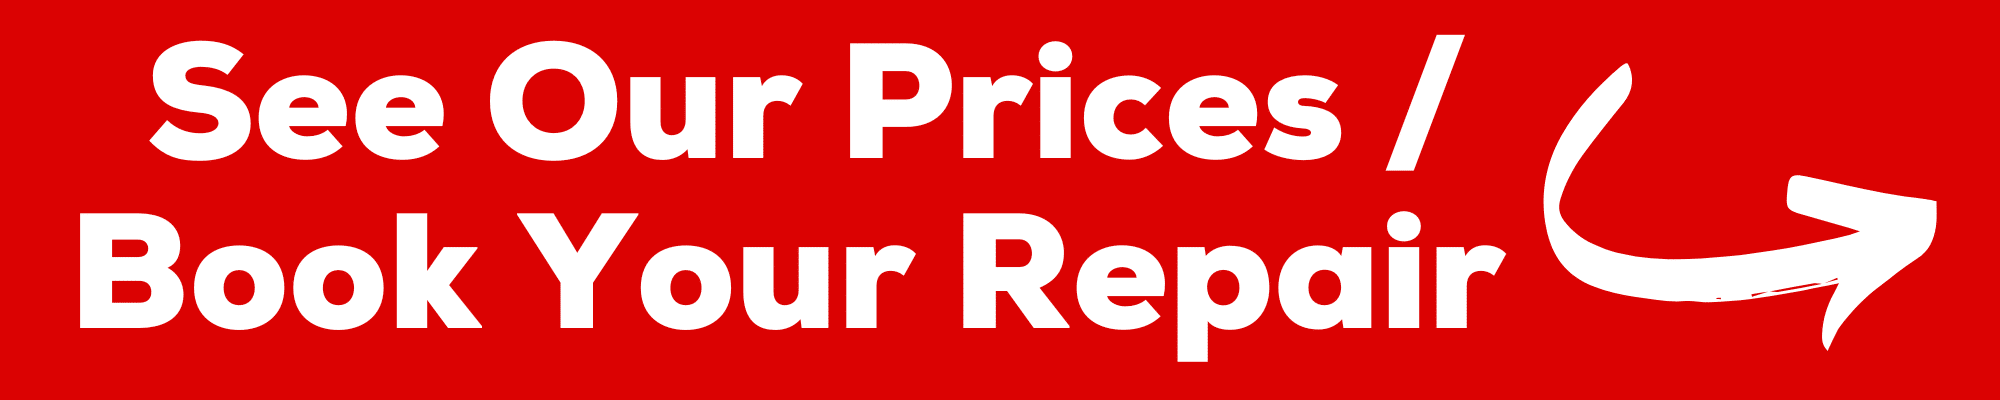 see our prices / book a repair